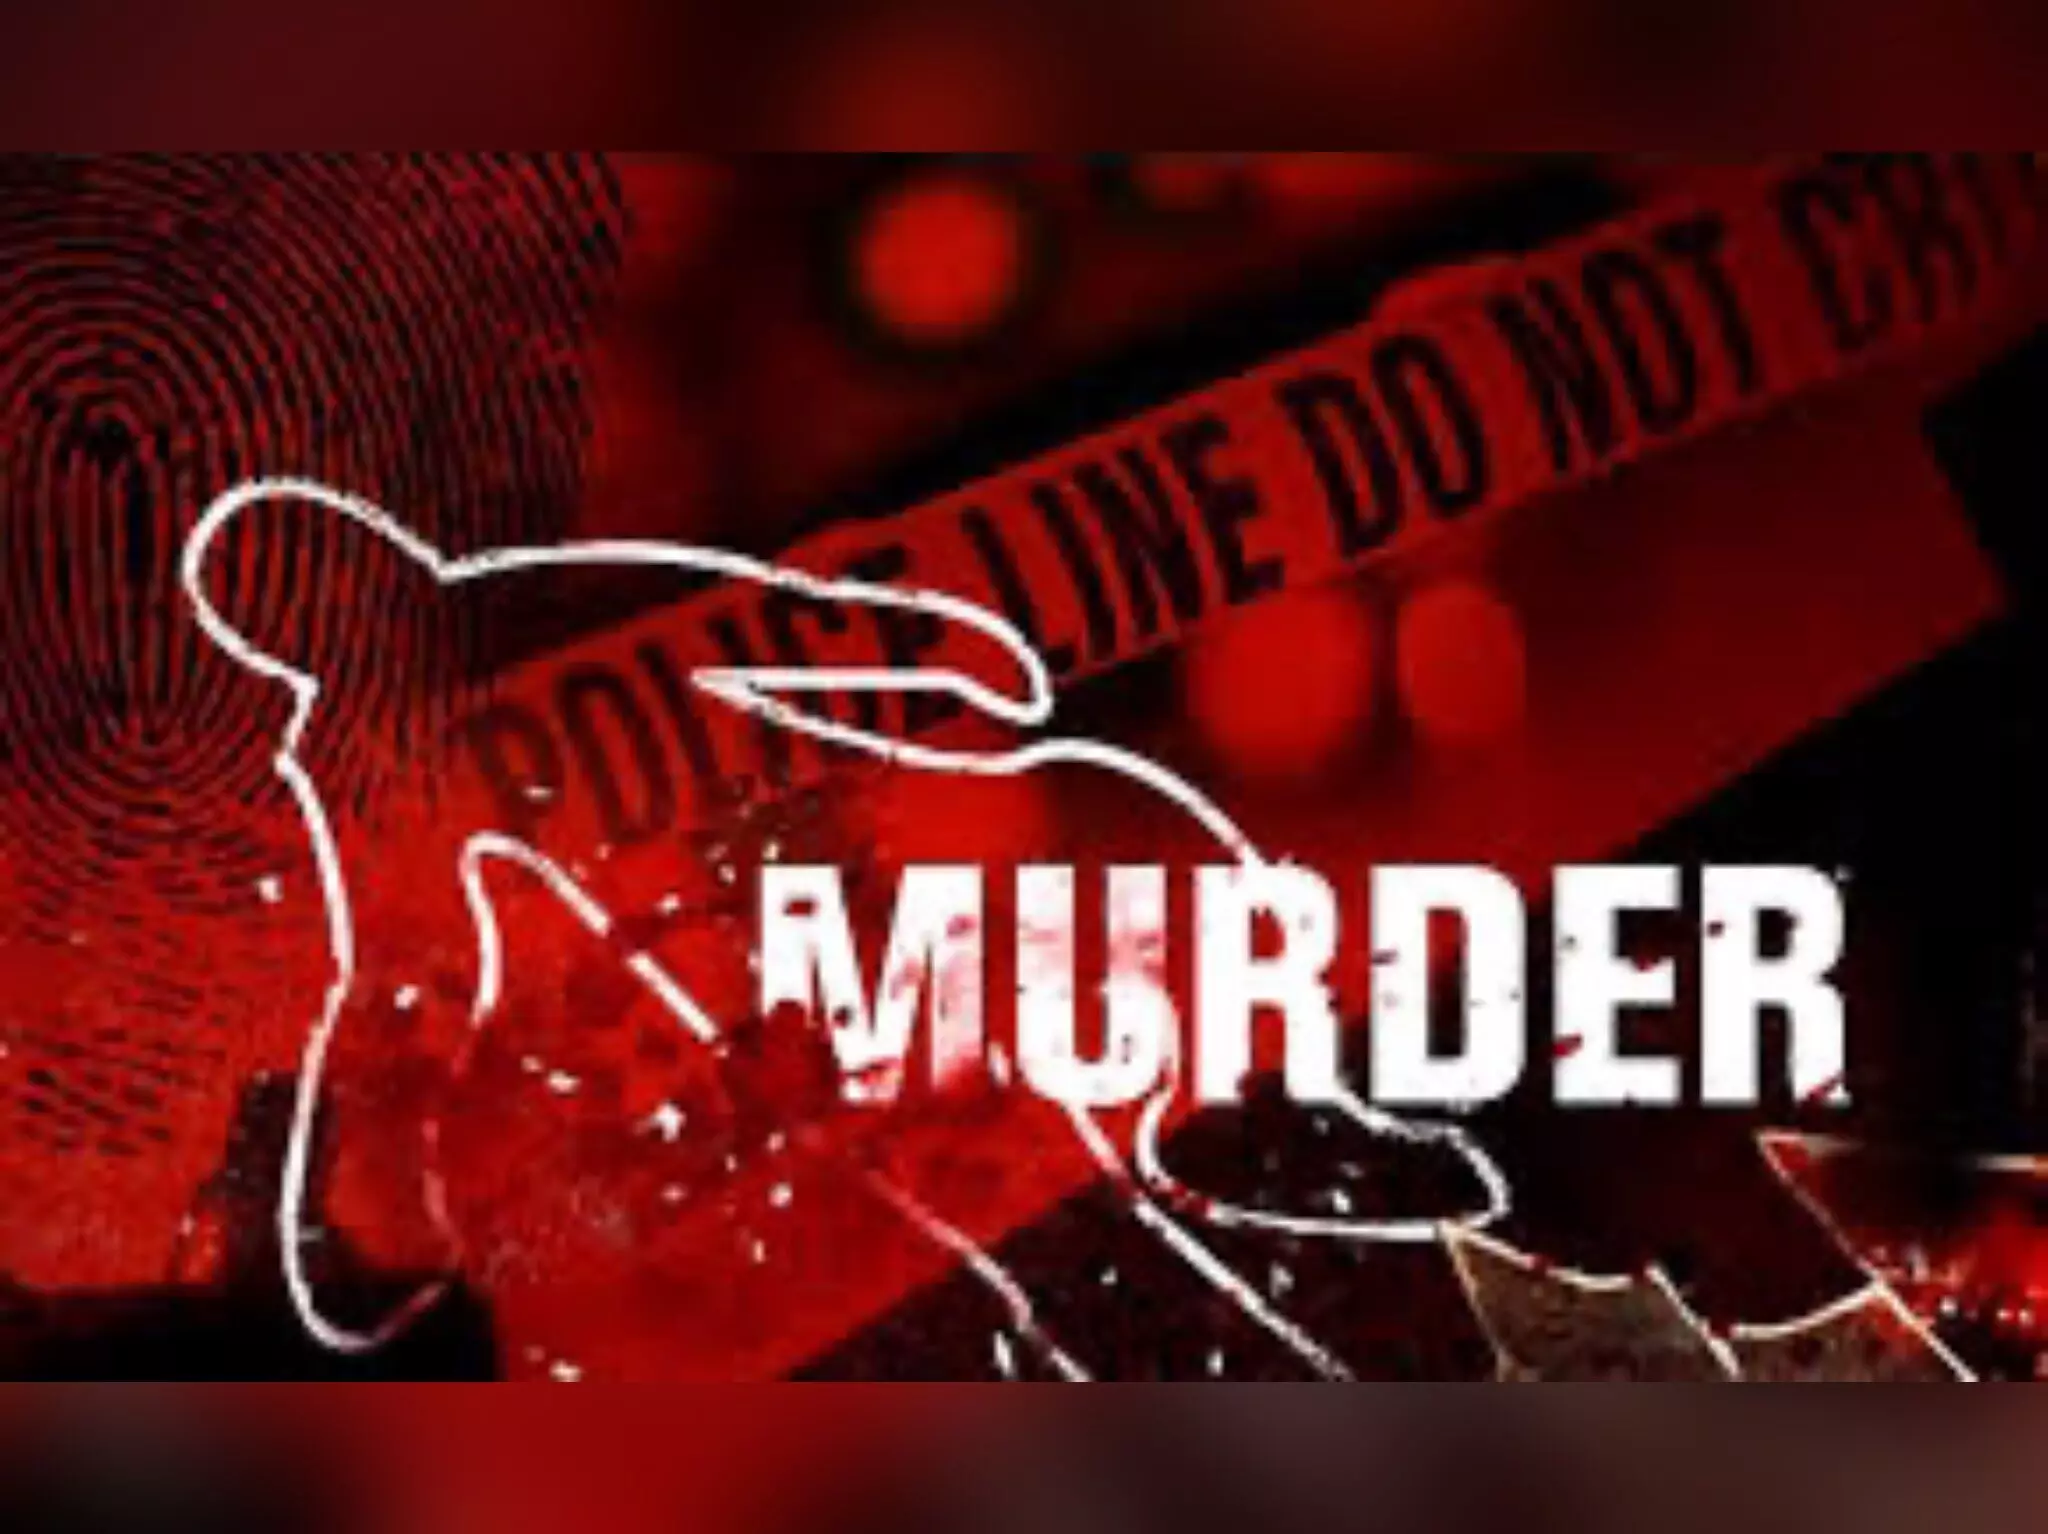 Congress worker hacked to death at public meeting in Rajendranagar